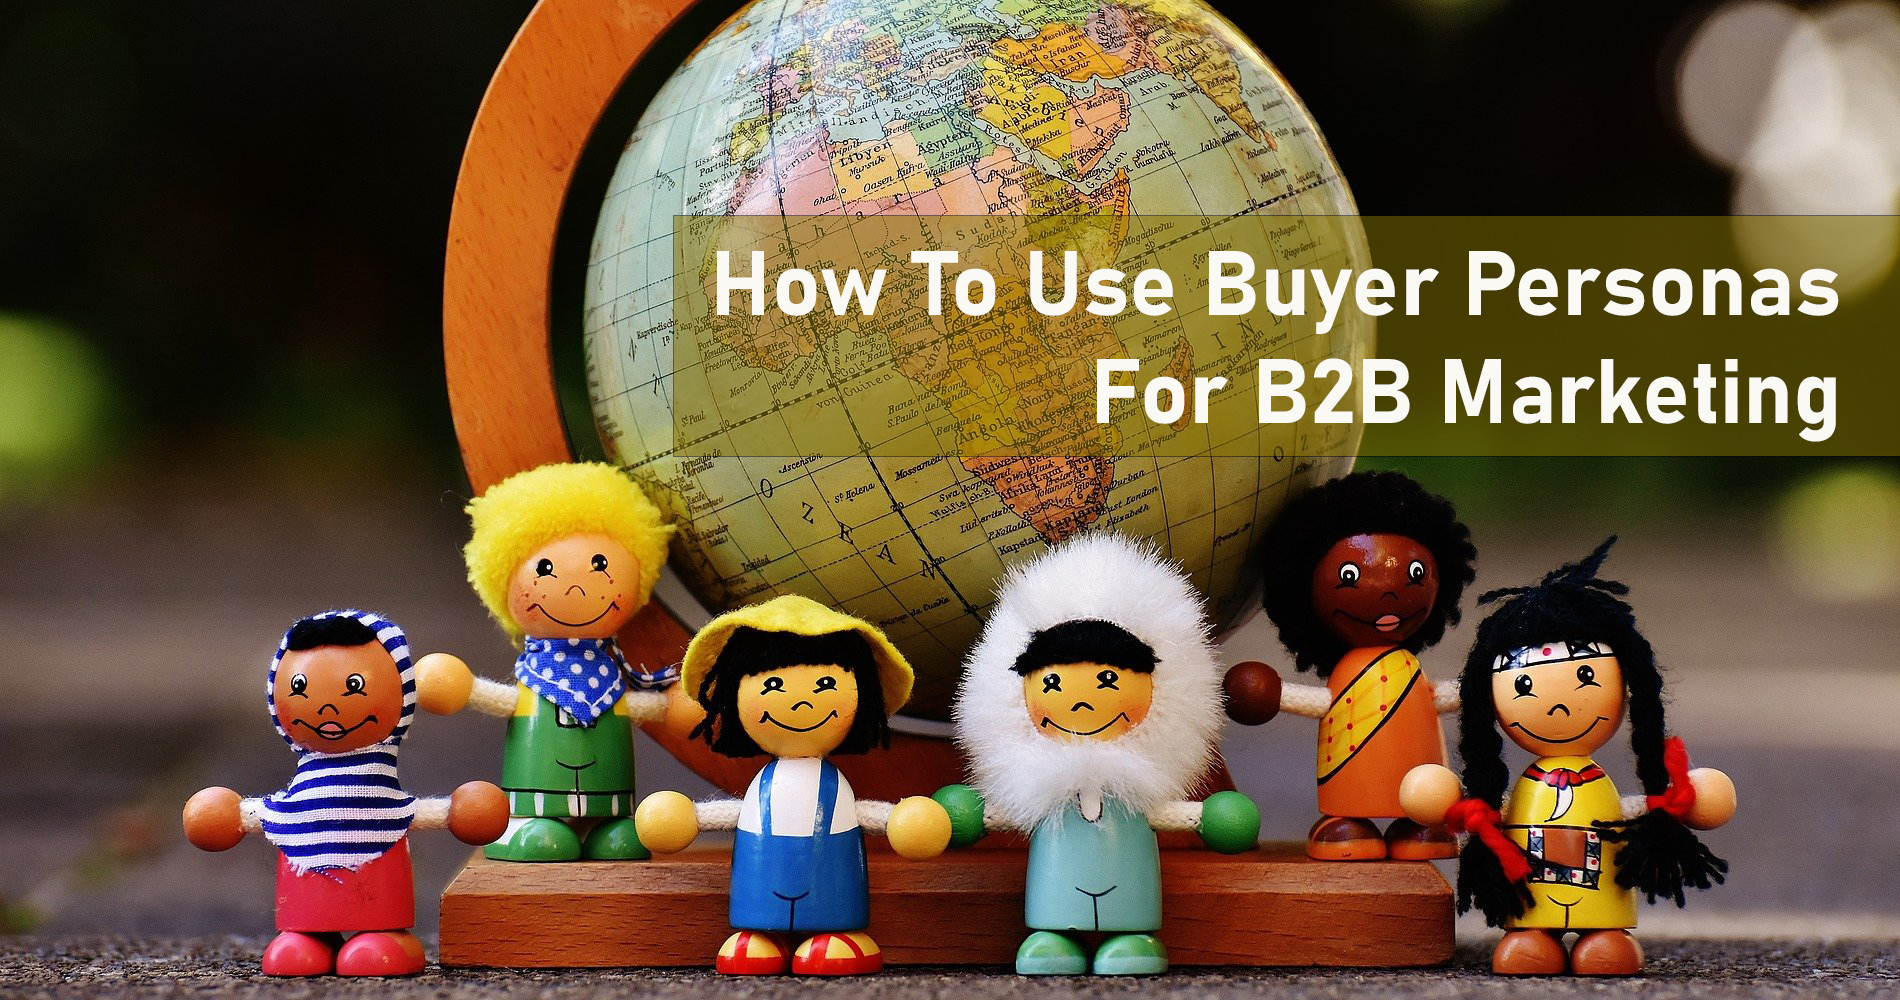 How To Use Buyer Personas For B2B Marketing